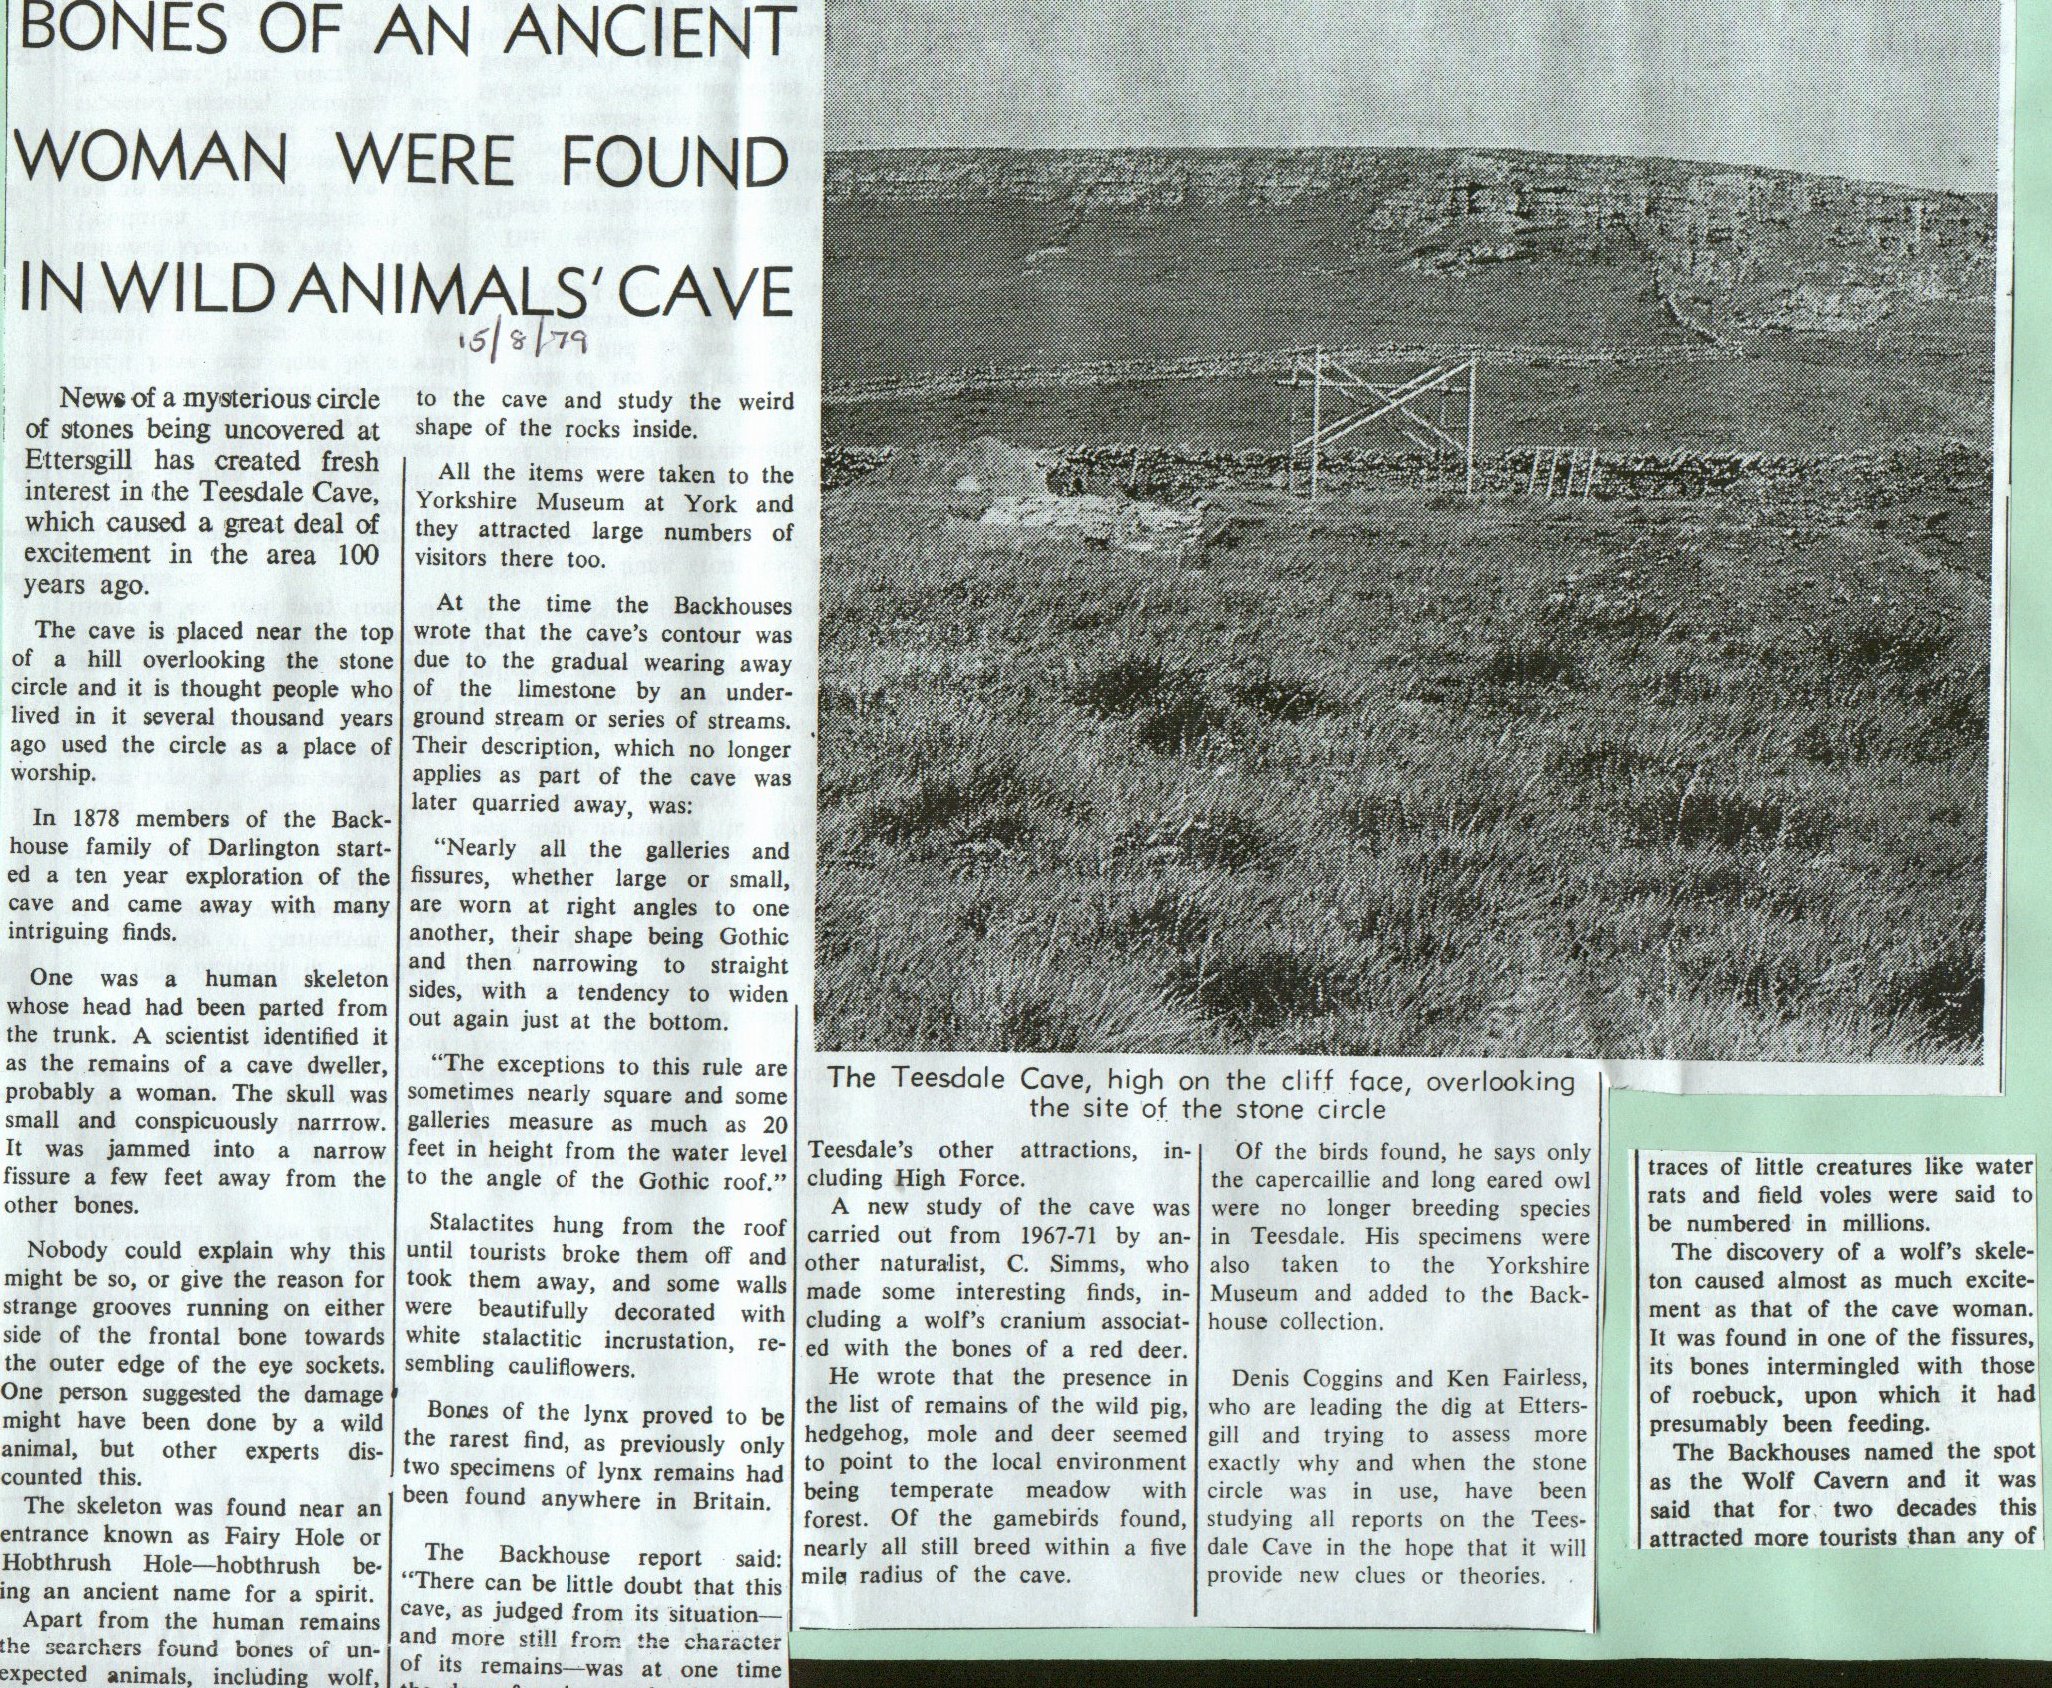  Bones of an ancient woman were found in wild animals' cave

Archaeology, Teesdale Cave 